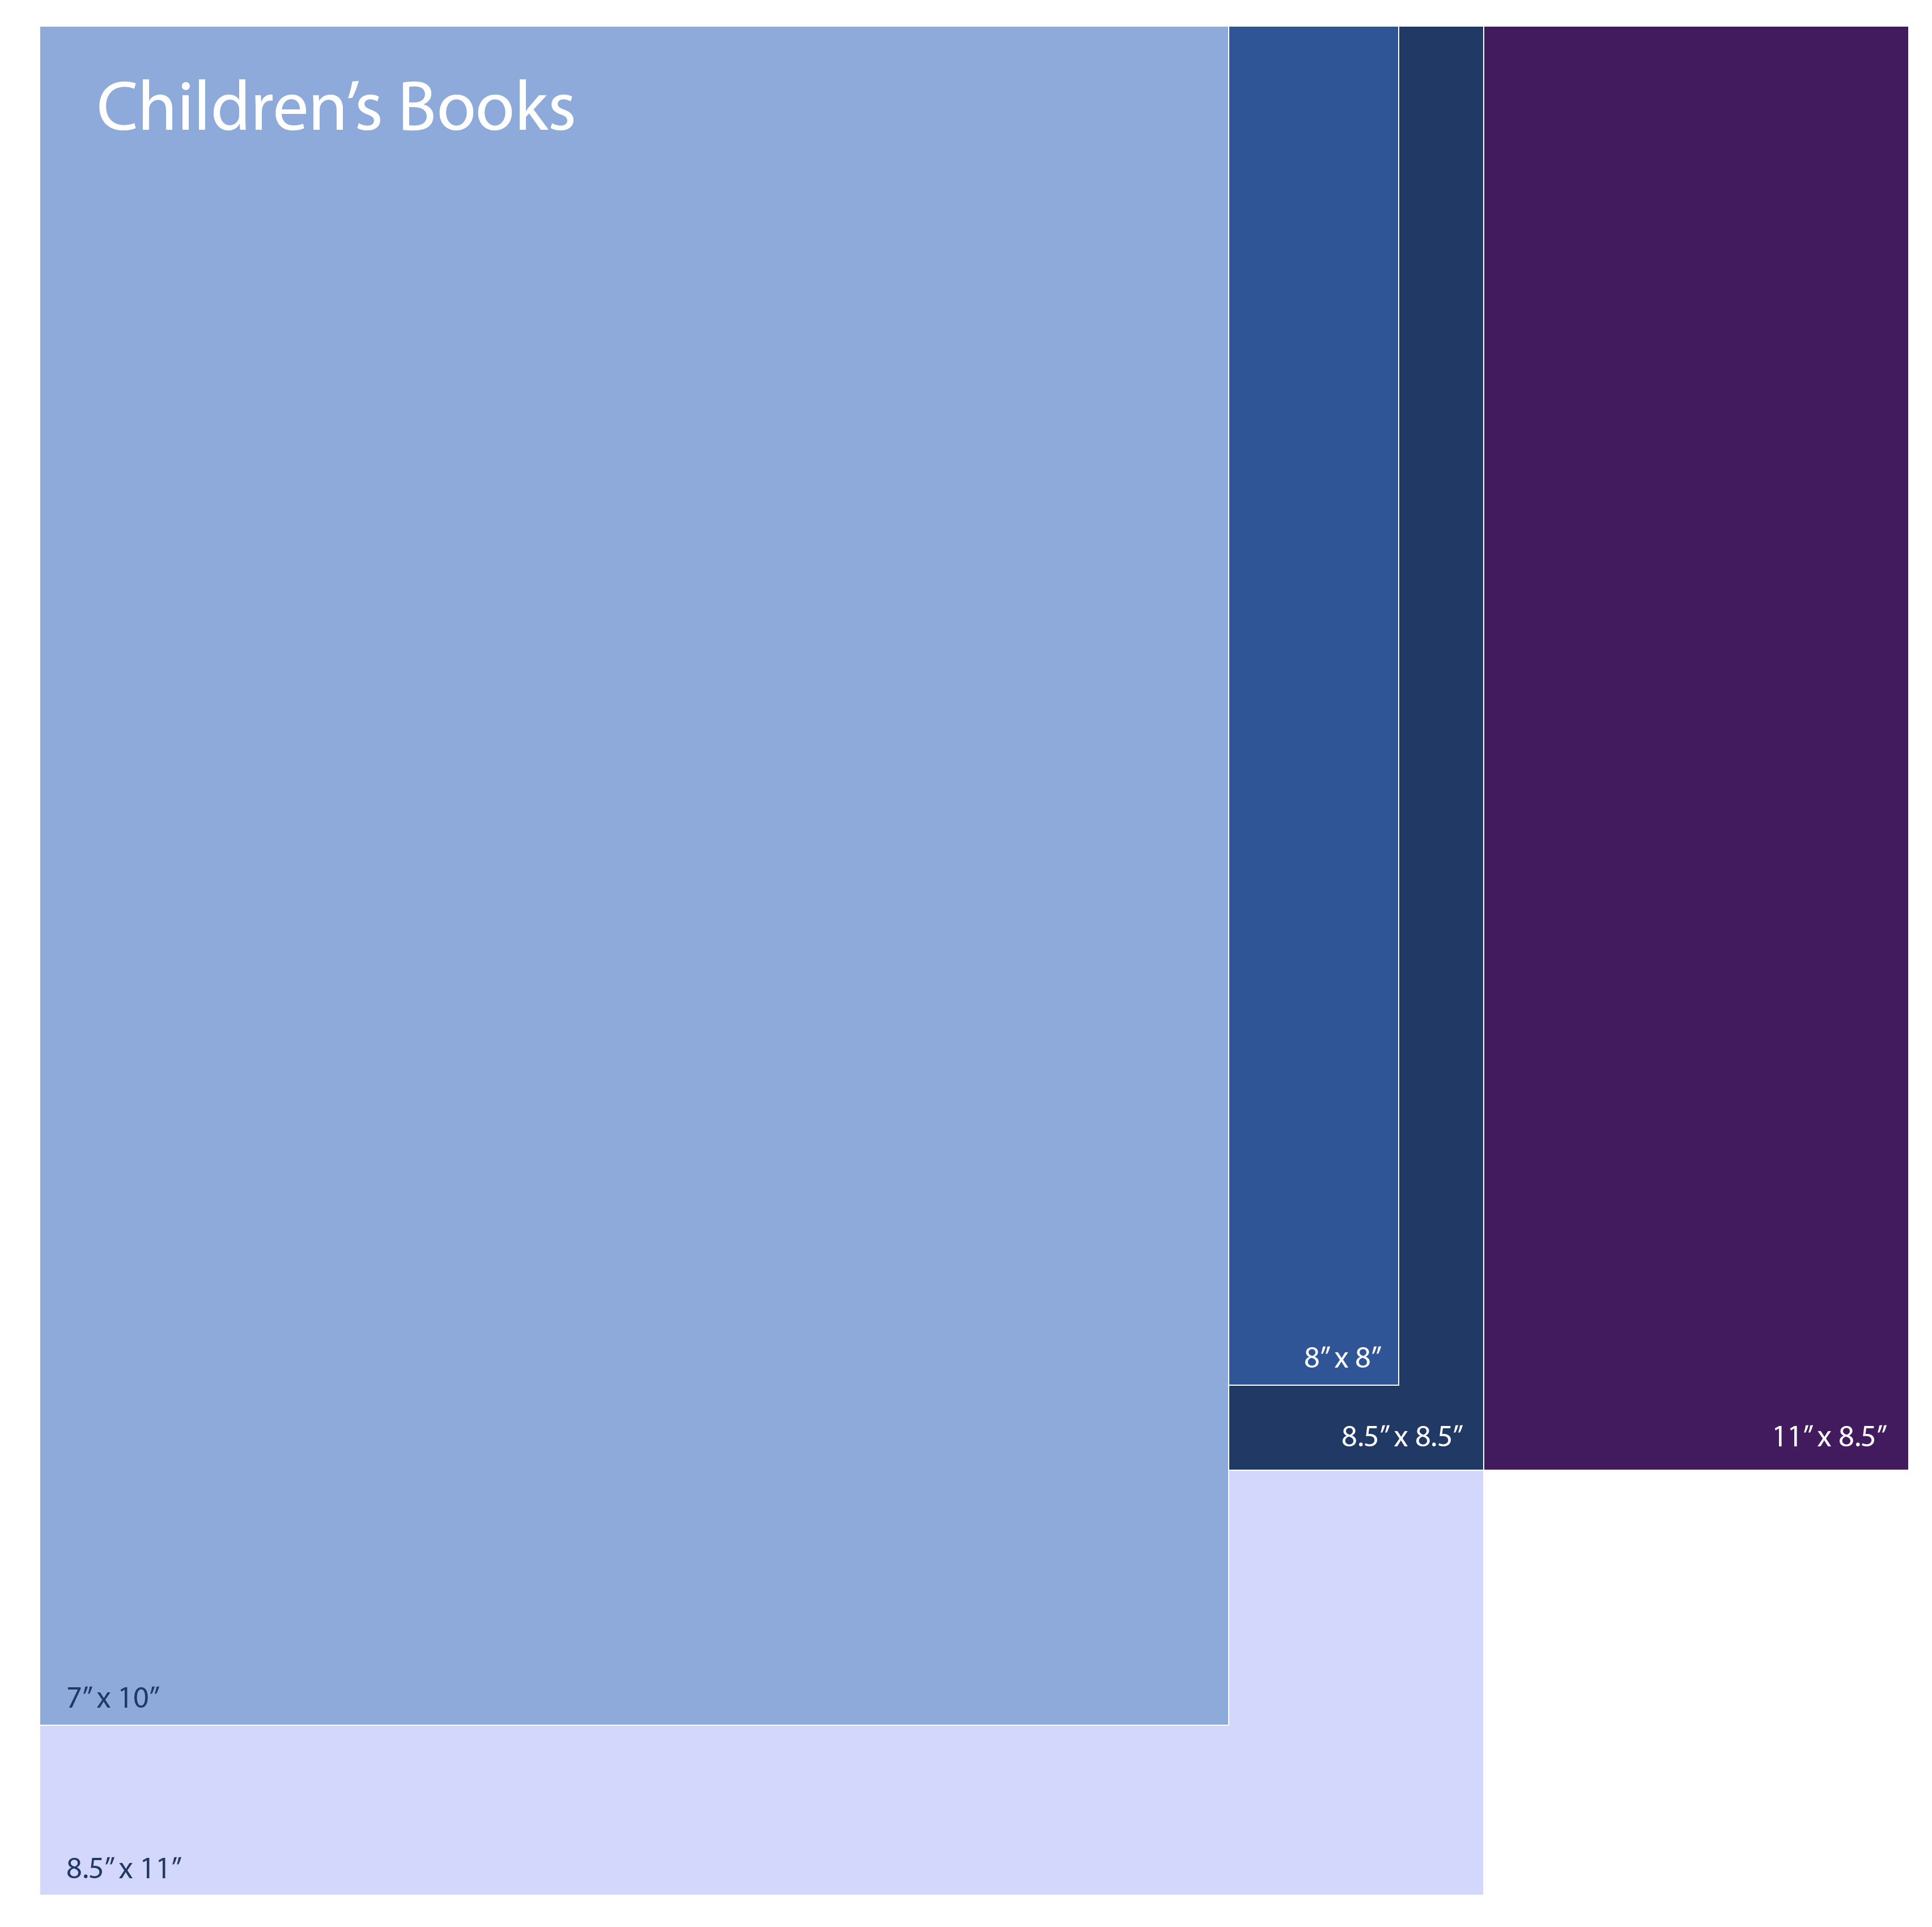 infographic of standard book trim sizes for children's books